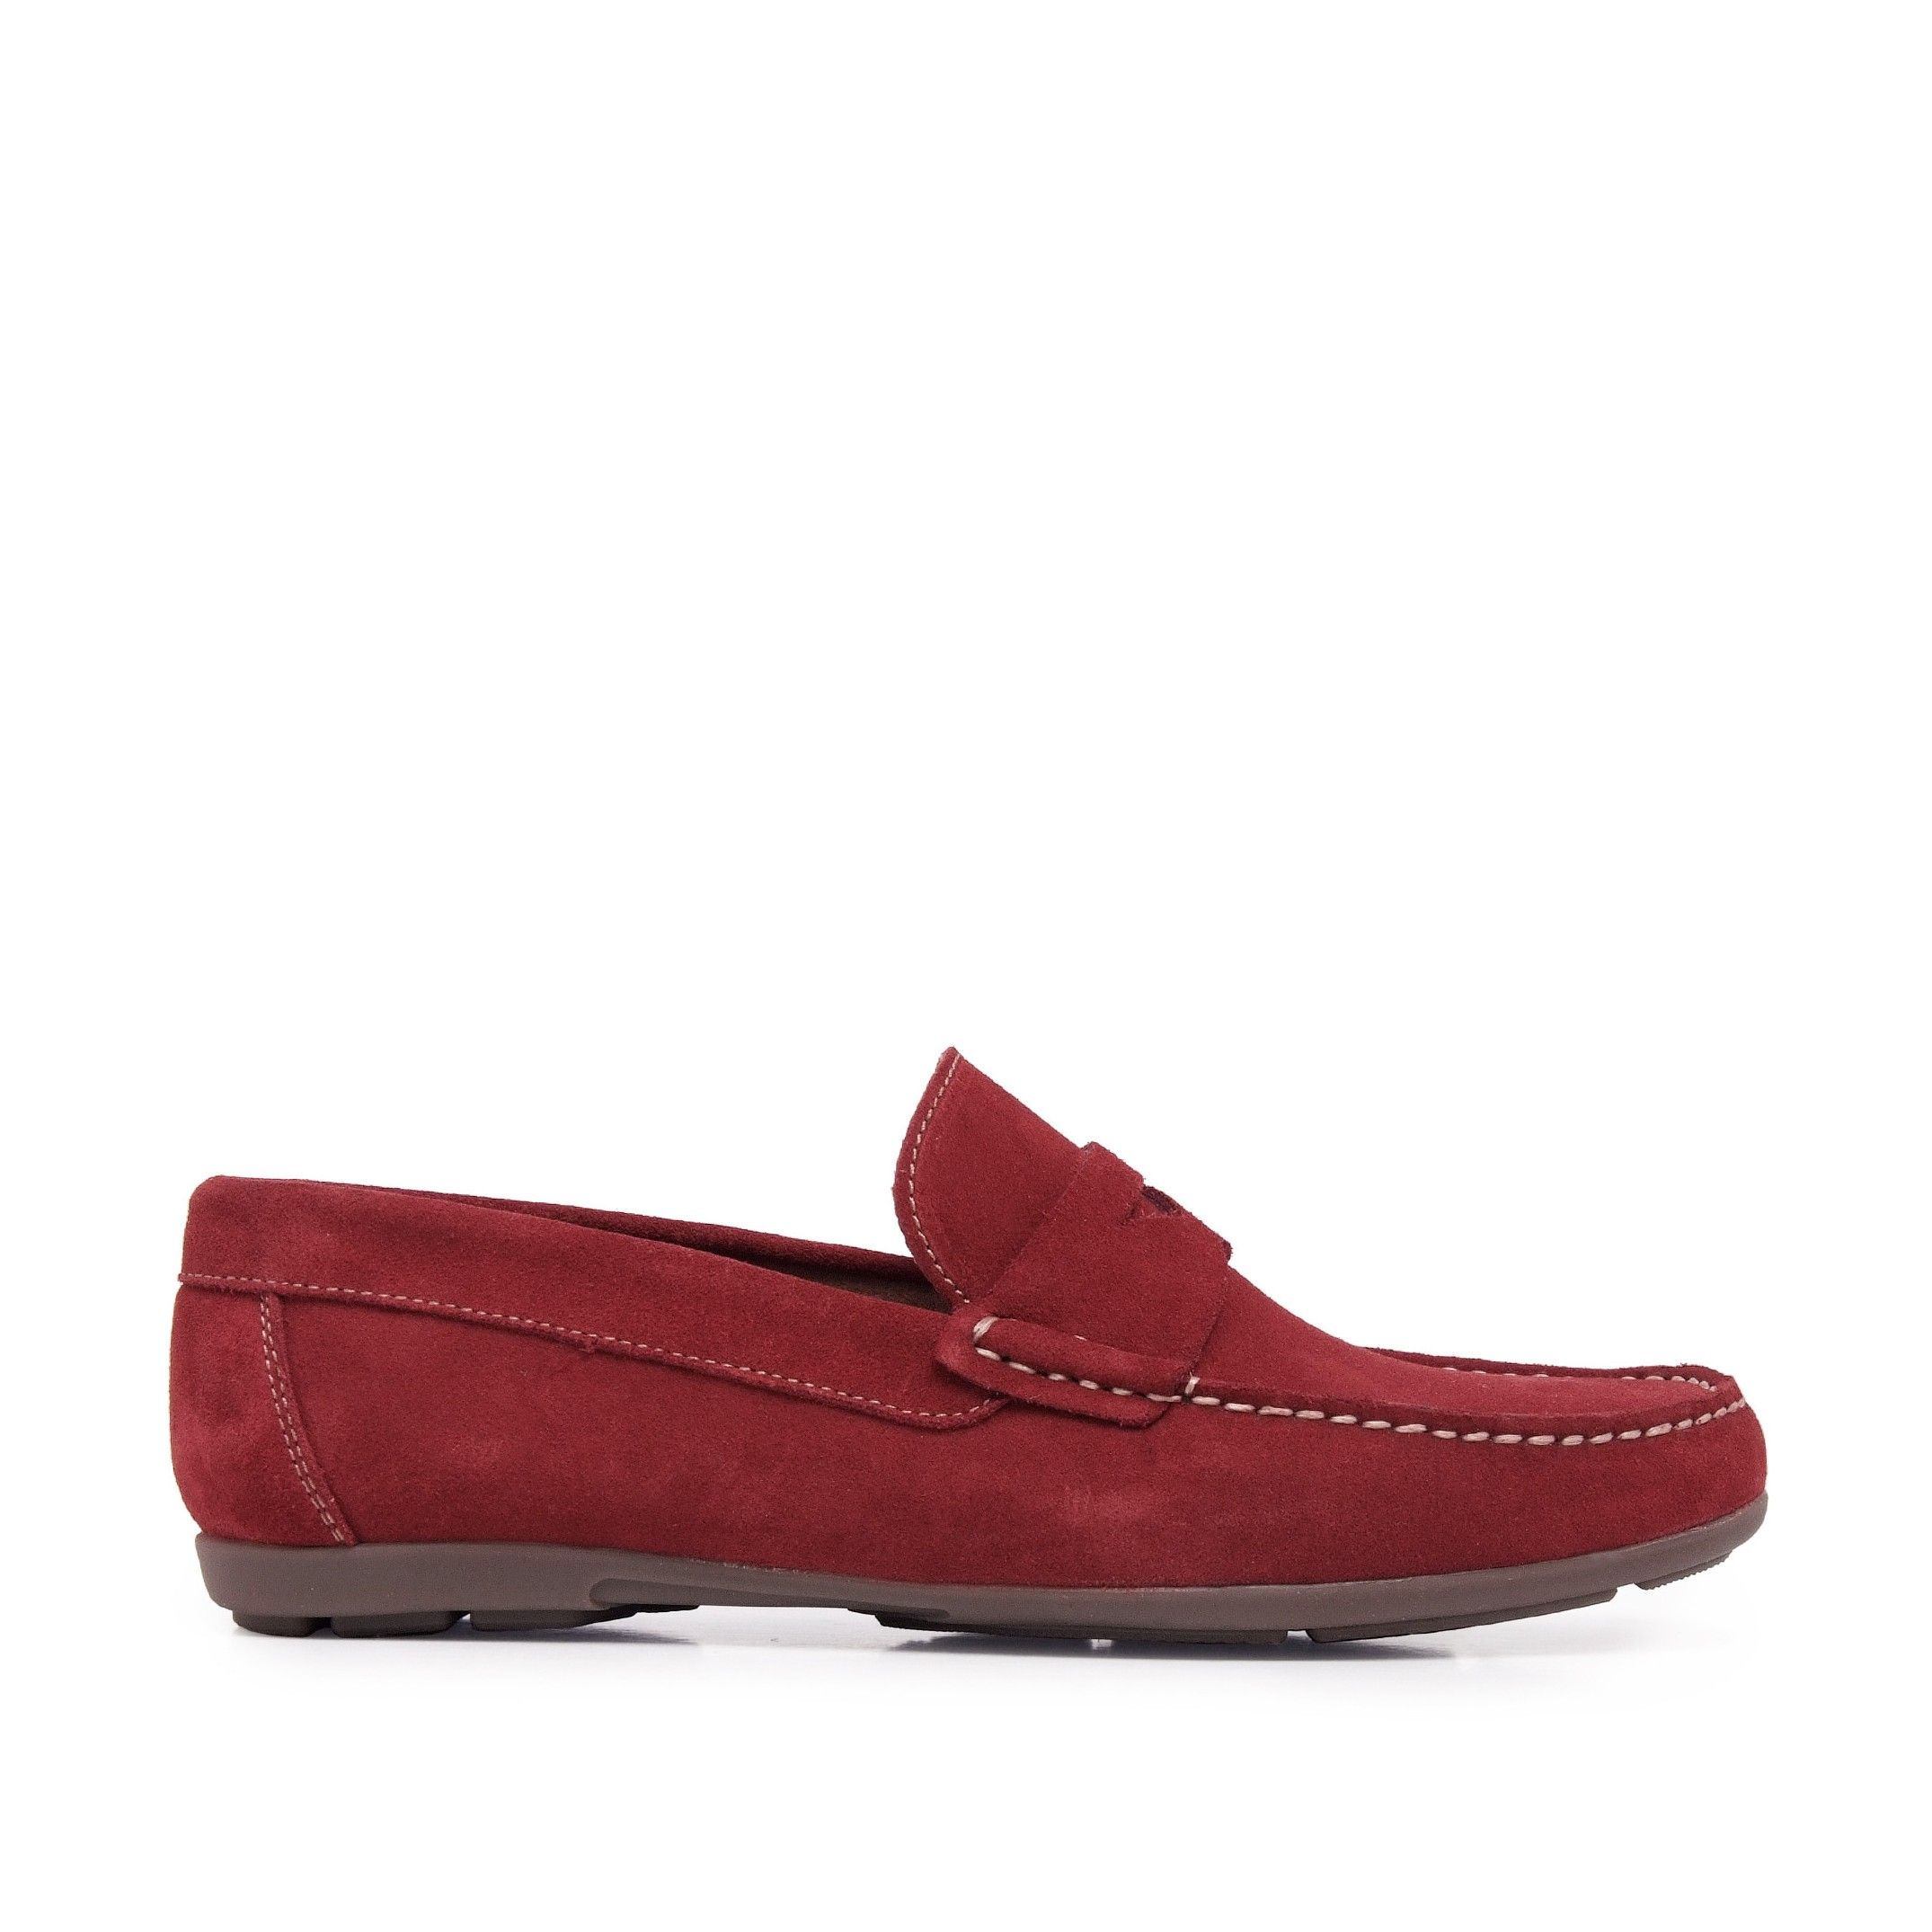 Leather loafers. Upper: leather. Inner and insole made of natural leather. Insole: leather. Sole: P.U. MADE IN SPAIN.